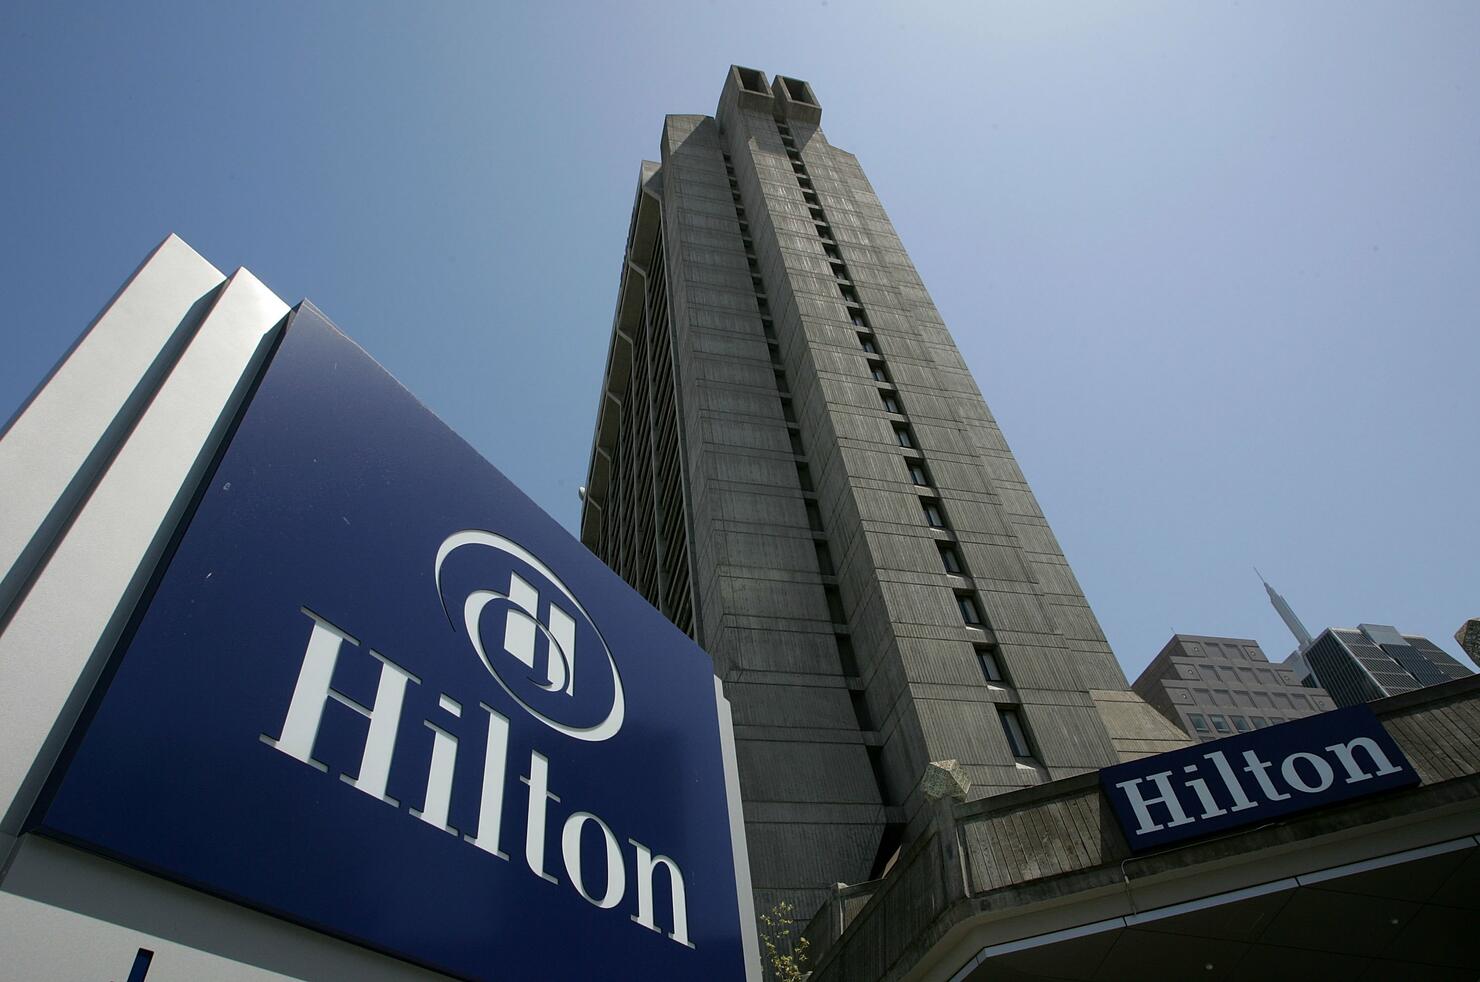 Hilton hotels to recycle used soap